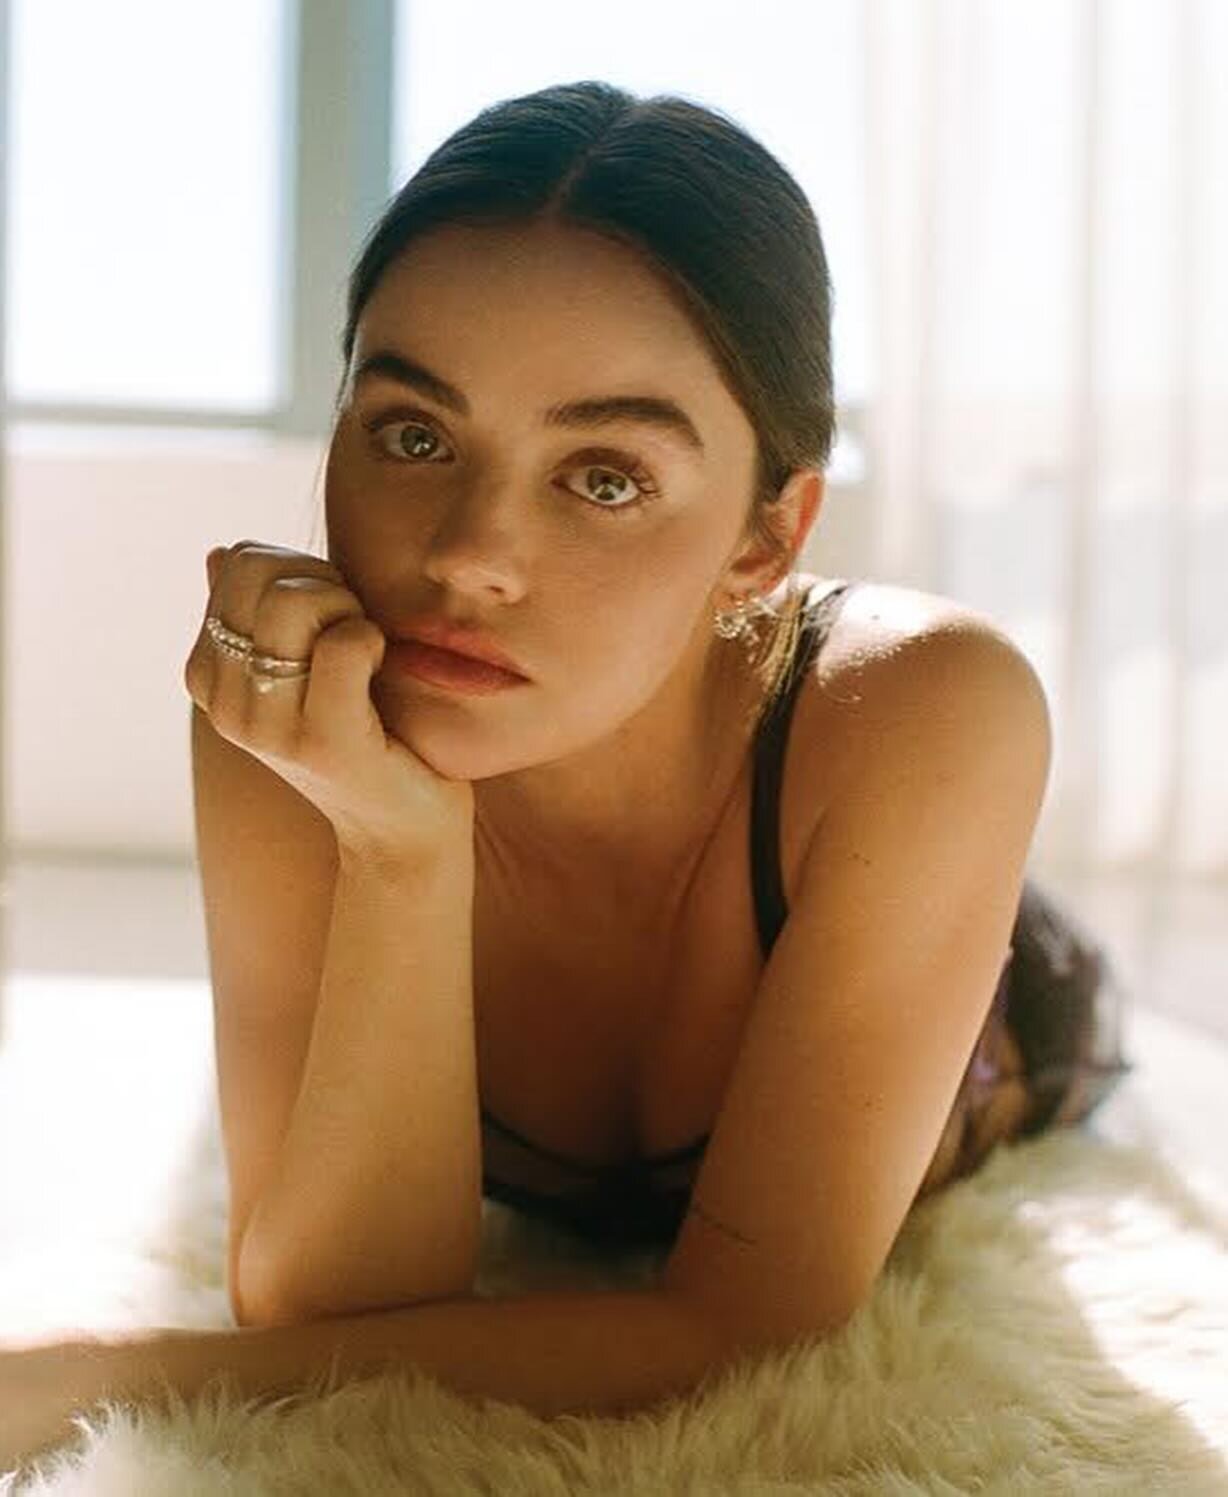 @LucyHale&nbsp;for Issue 191, Fresh Cuts

Lucy wears&nbsp;@Coach&nbsp;dress, bra, and underwear and&nbsp;@TheOfficialPandora&nbsp;earrings and rings, and talent&rsquo;s own ring (thumb).

Credits:
@FlauntMagazine
Photographed by @InstaMaxMonty
Styled